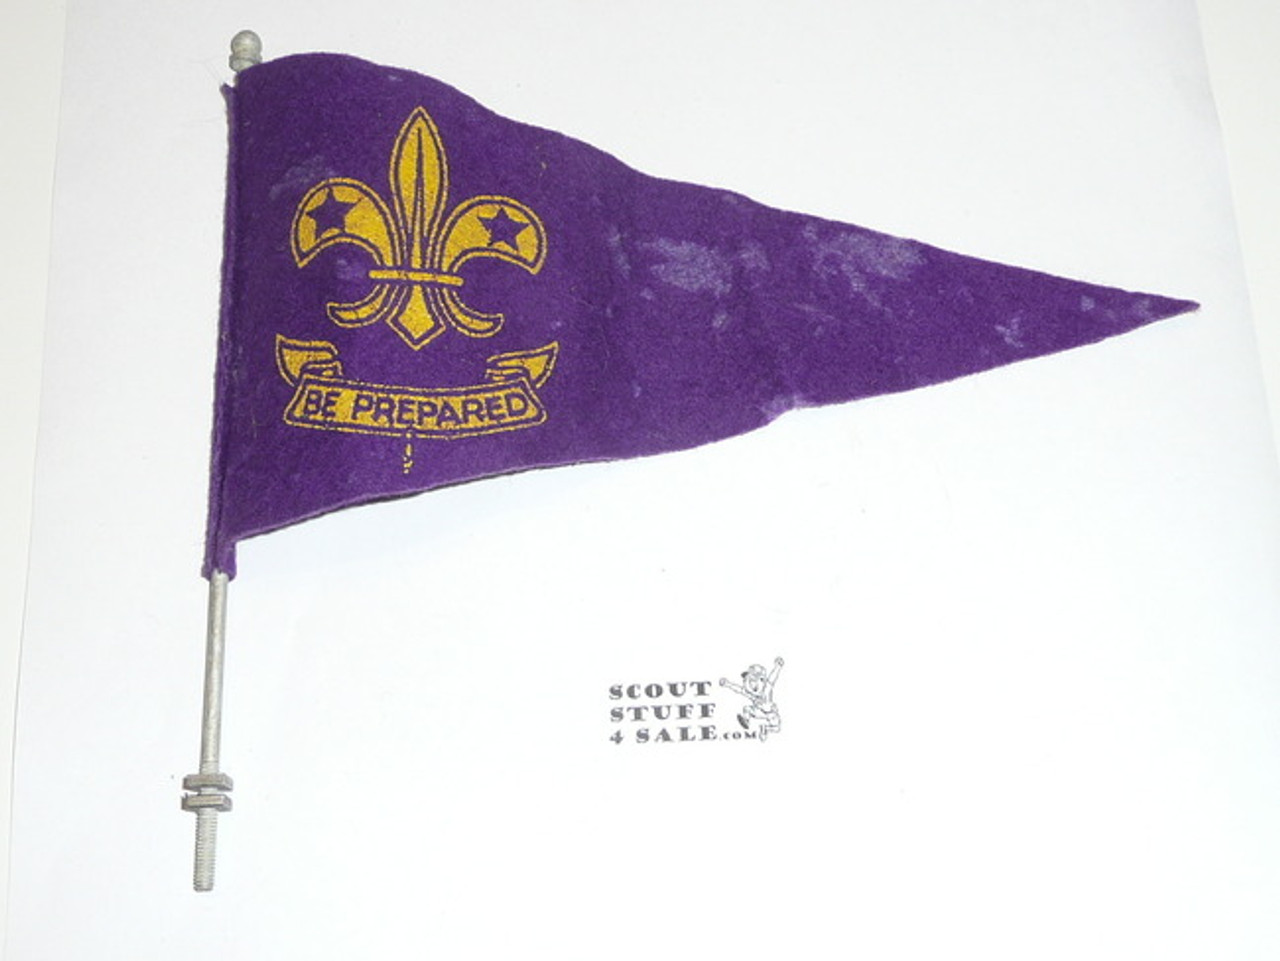 Felt Foreign Boy Scout Small Flag, Shows Wear, 2 Sided, Purple